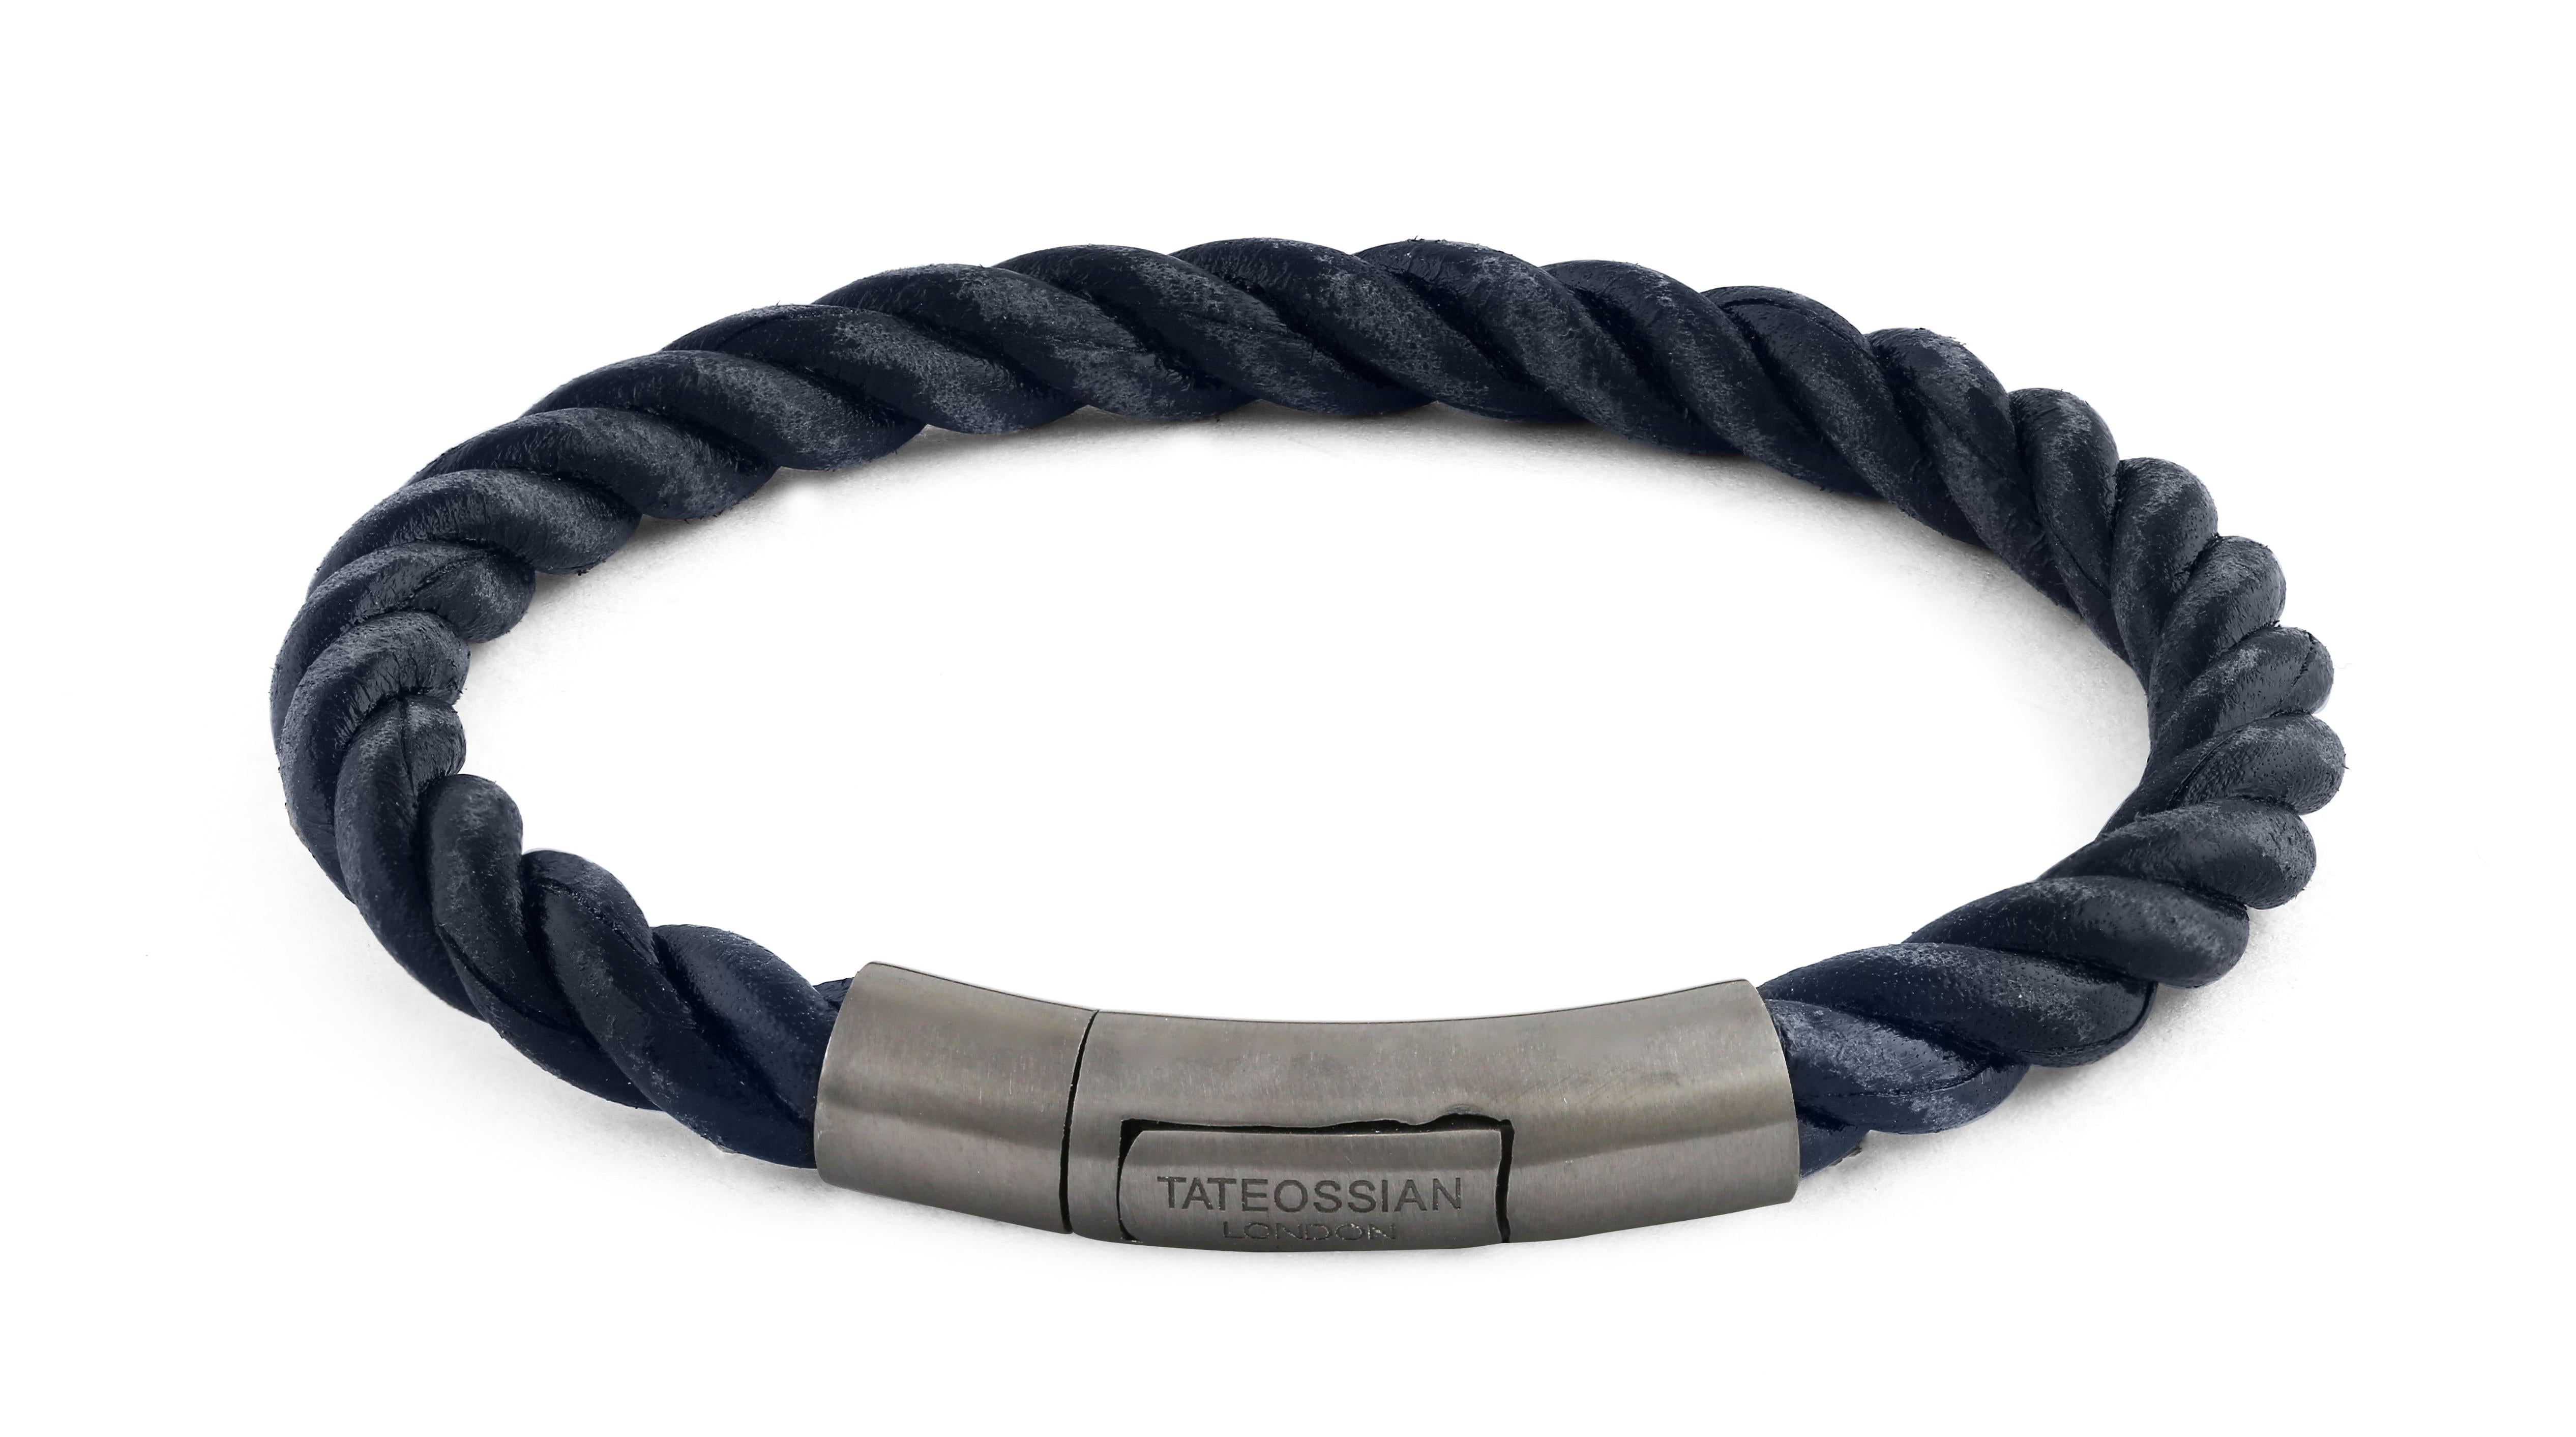 Italian leather has been expertly braided into this twisted retro looking style. The chunky bracelet has been finished with our sleek, satin finish clasp in black rhodium plated sterling silver.
Available in medium (18cm) inner circumference.